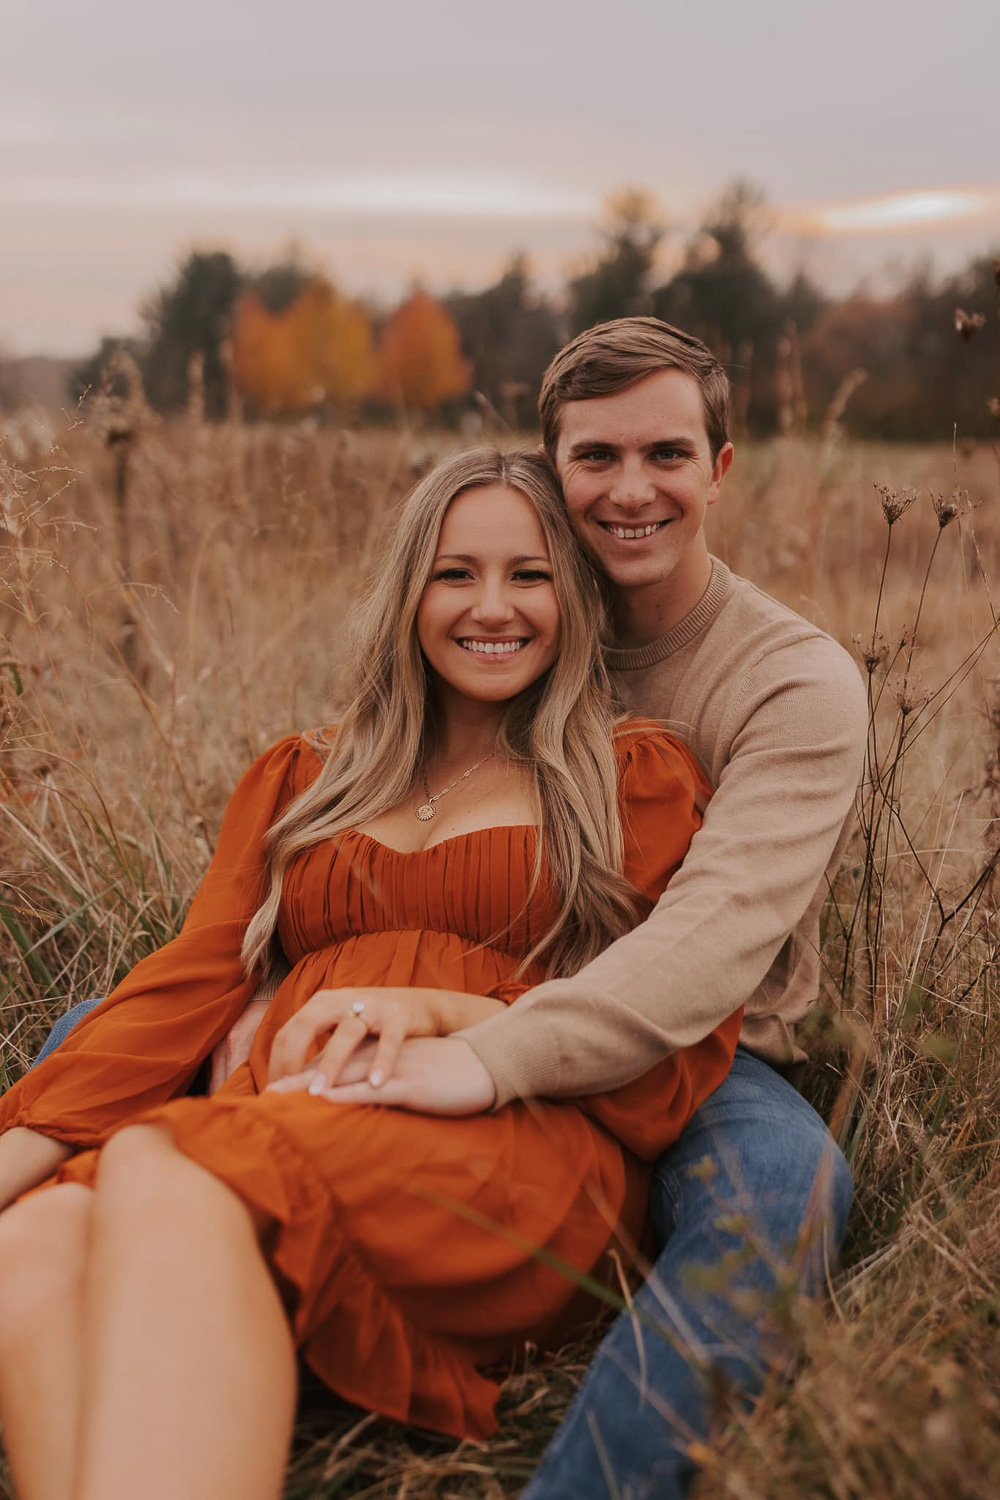 A couple sitting in a grassy field smiling